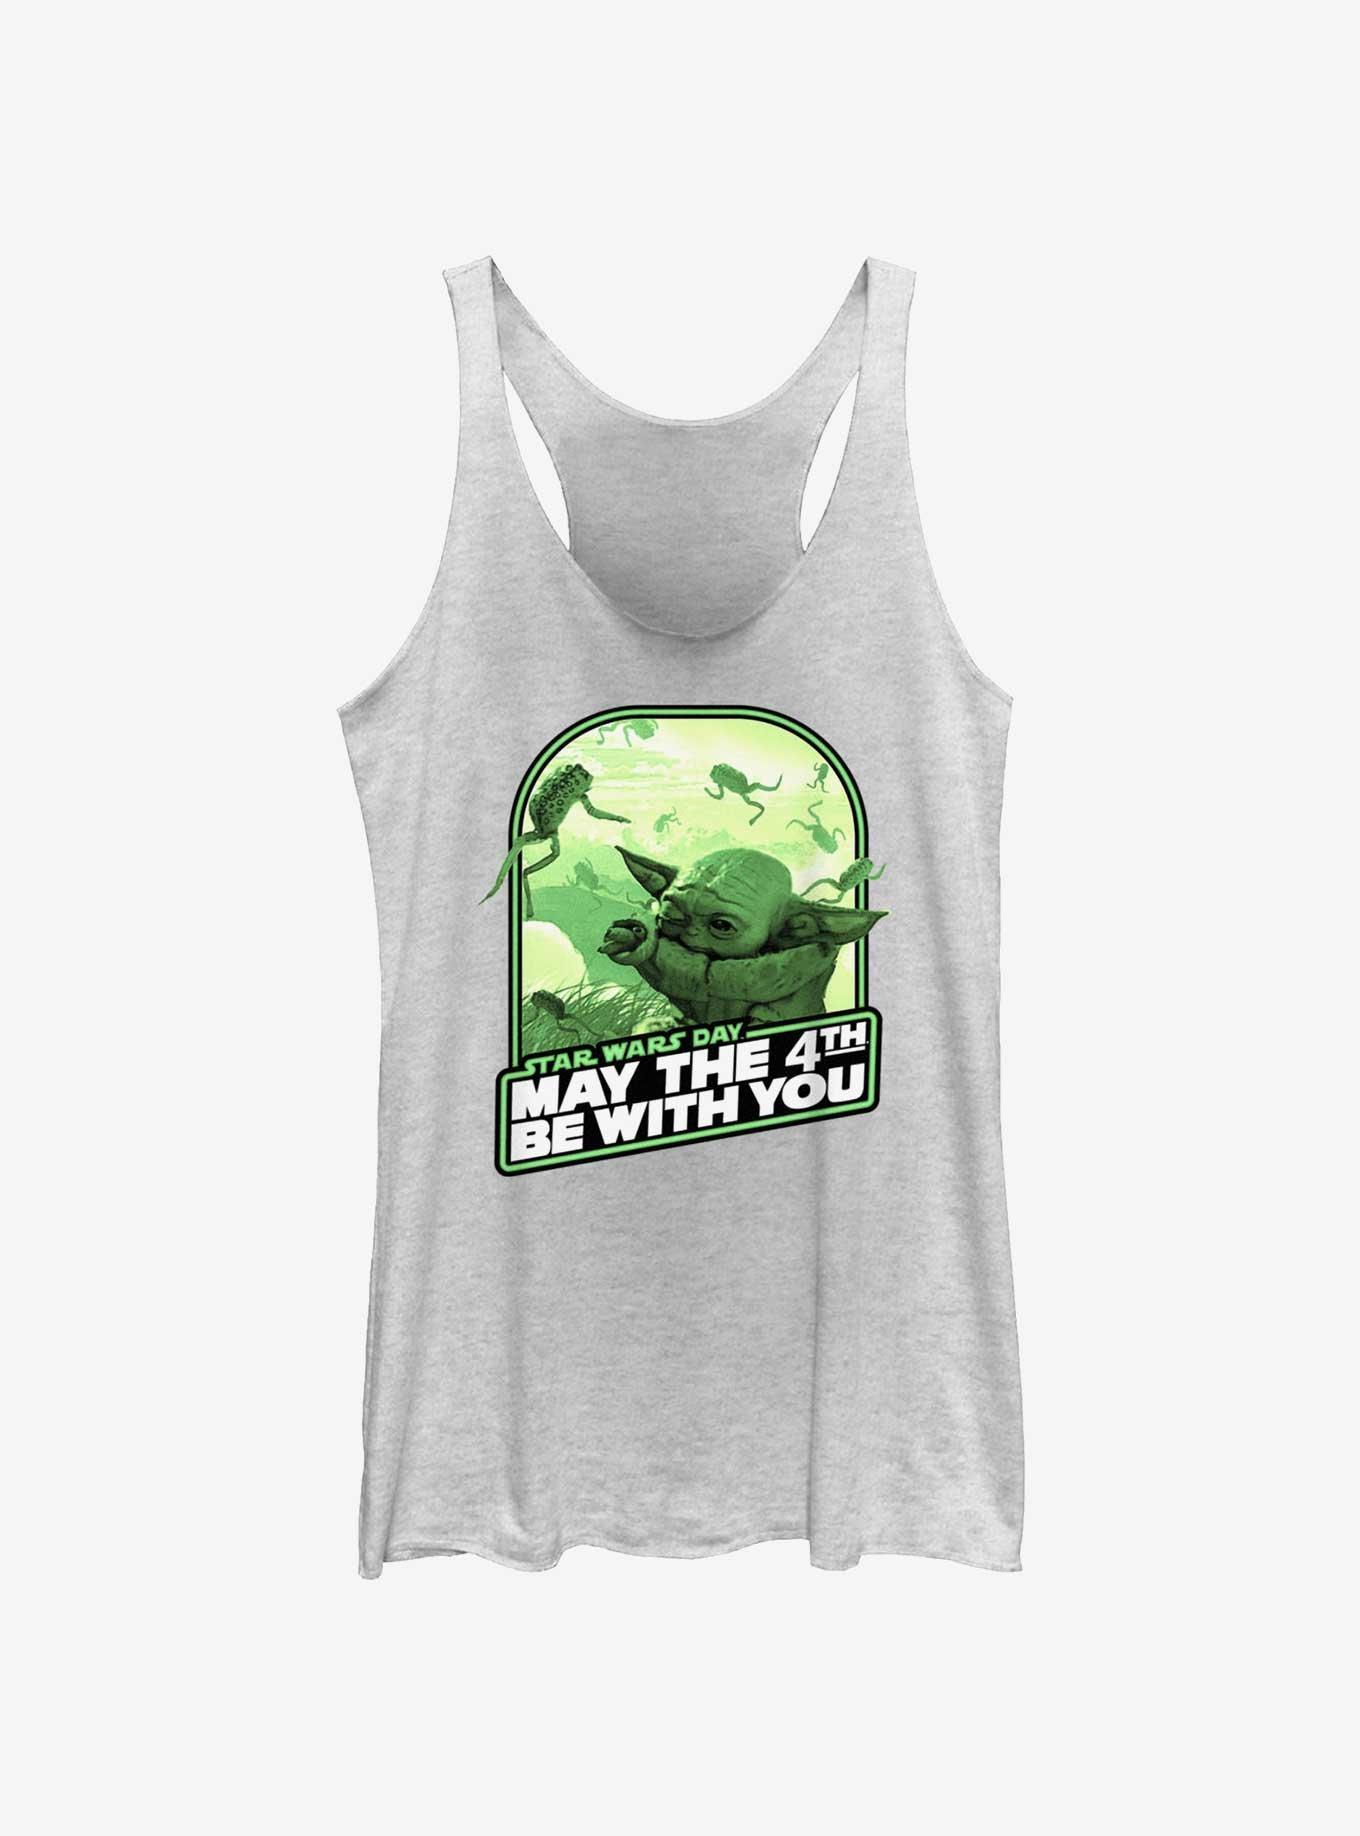 Star Wars Grogu Frog Food May The 4th Be With You Girls Tank, WHITE HTR, hi-res